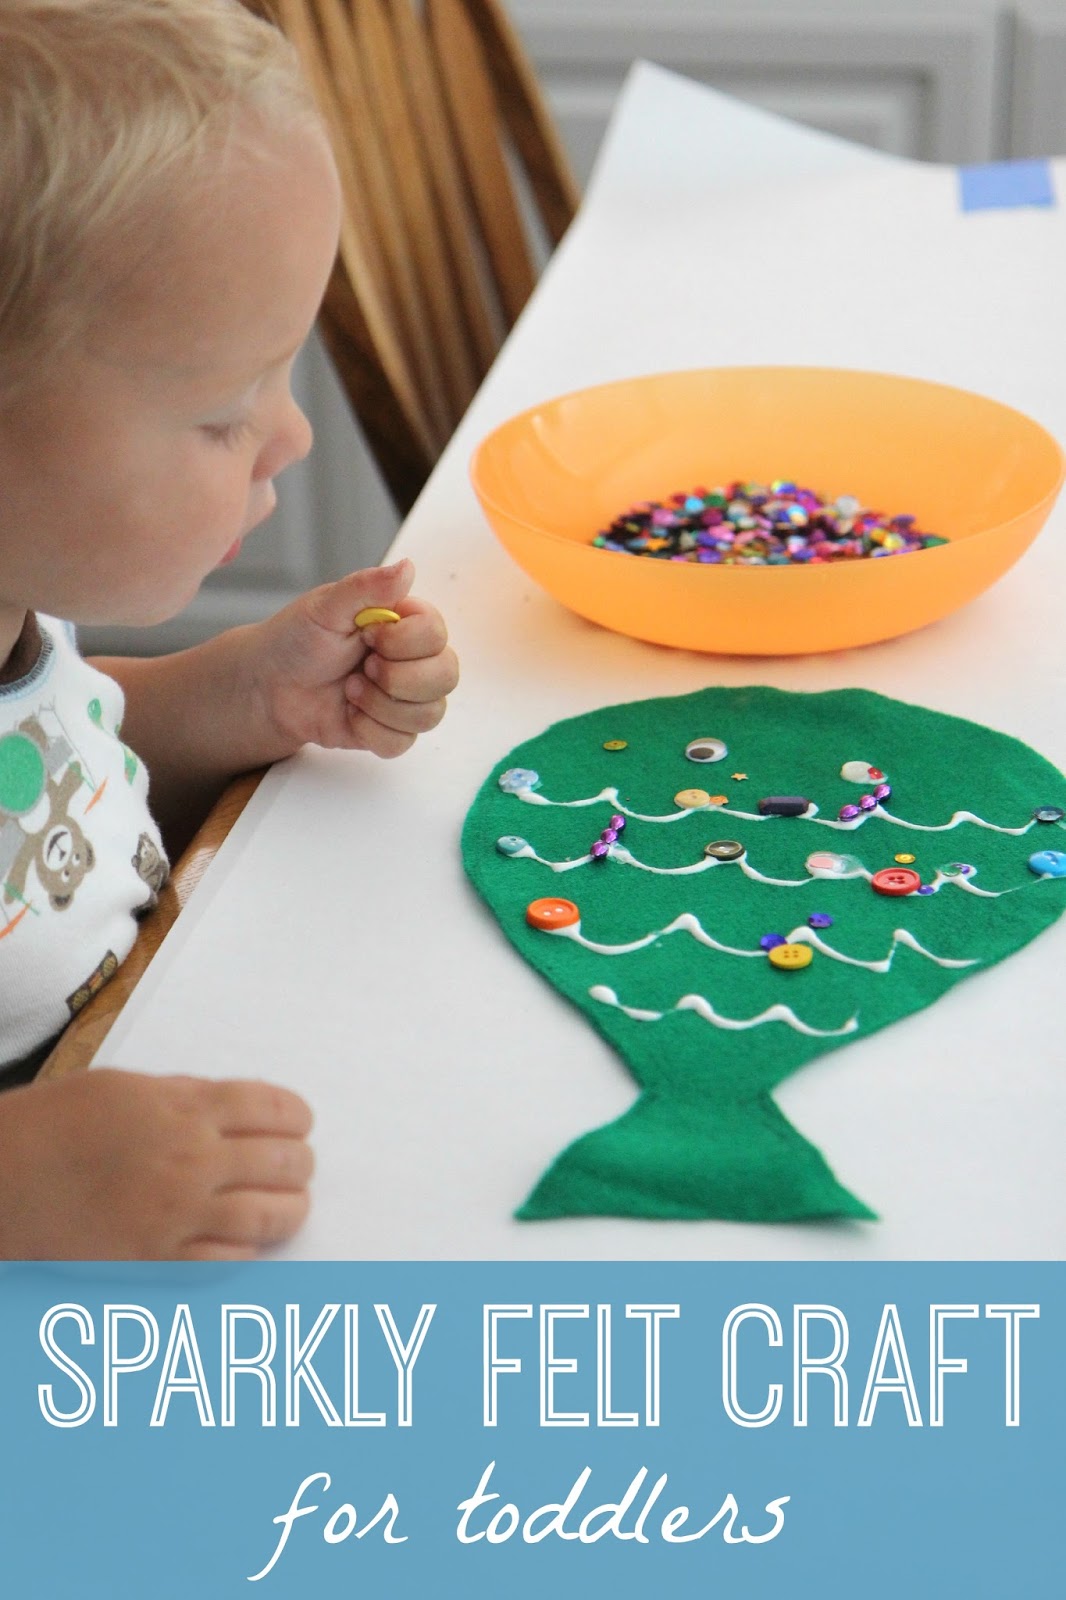 Toddler Approved!: Sparkly Felt Fish Craft for Toddlers